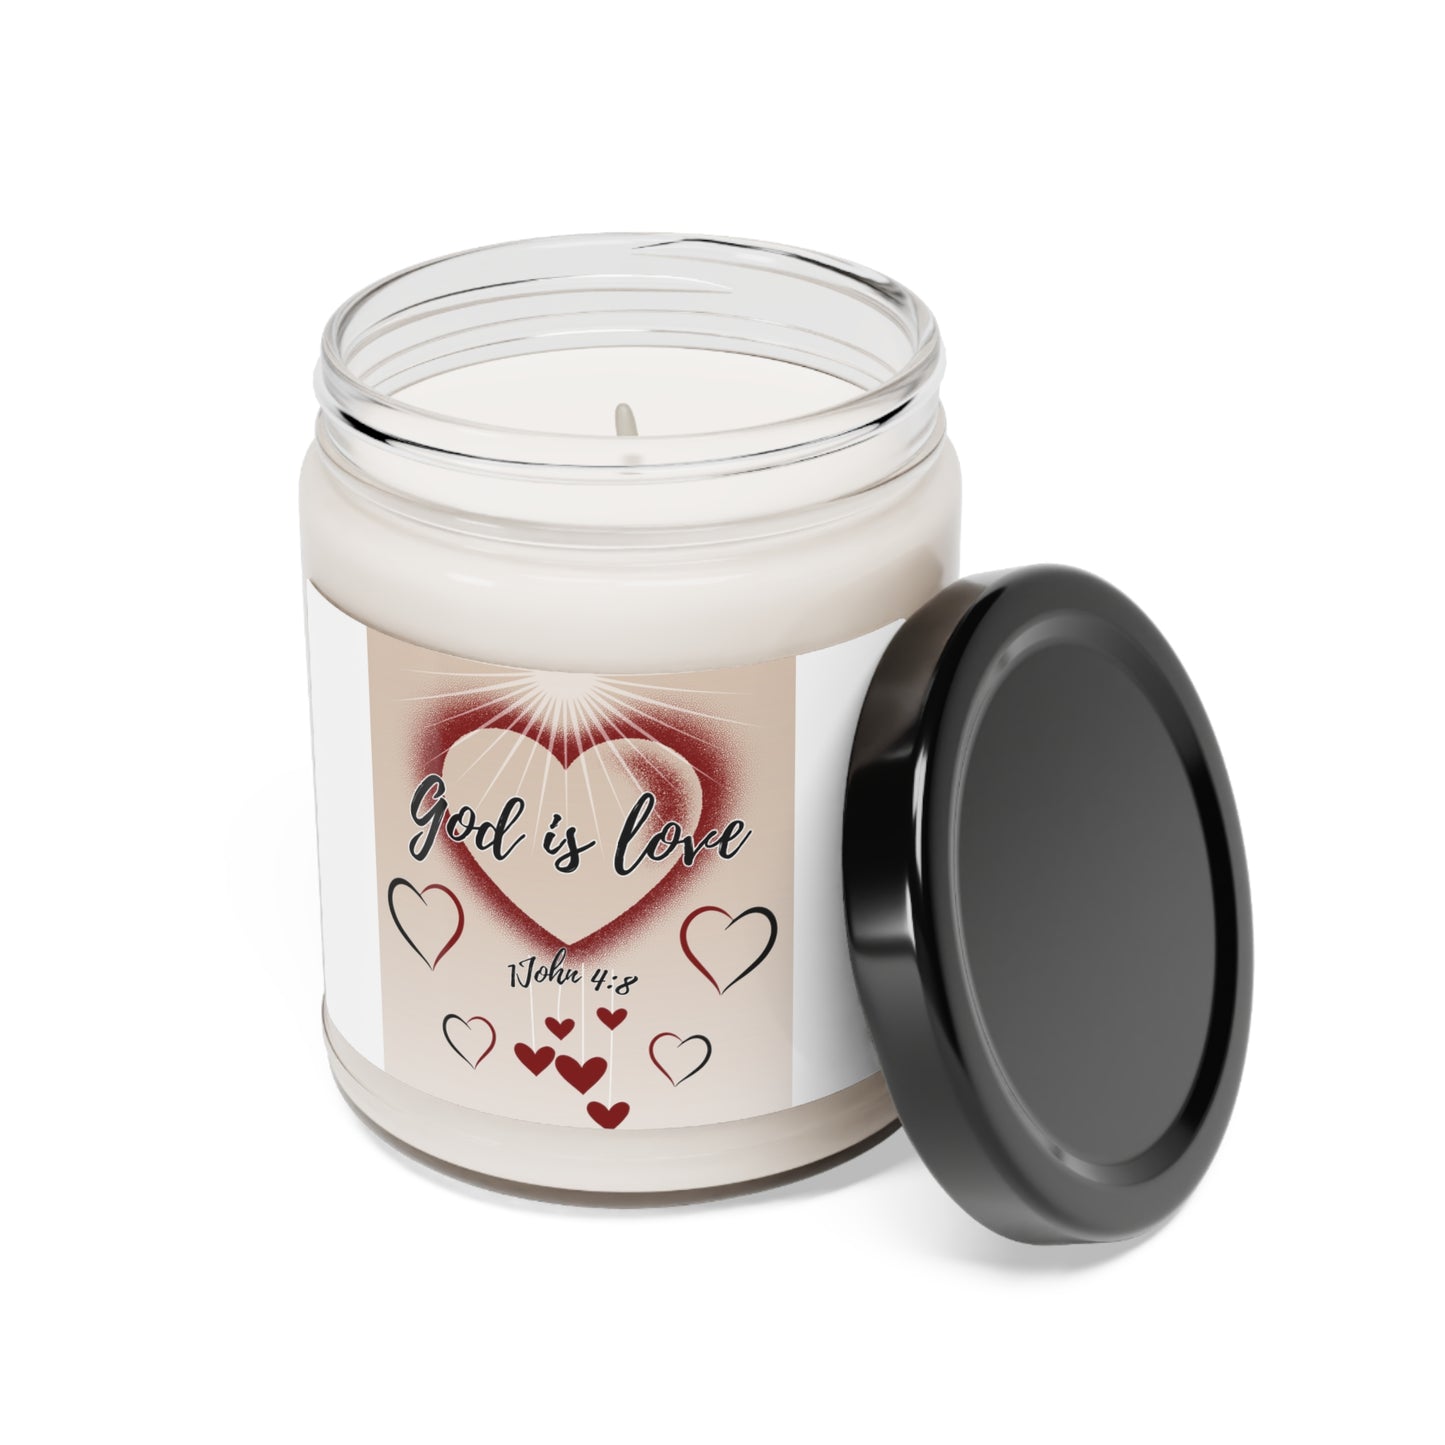 God Is Love! Candle, 9oz